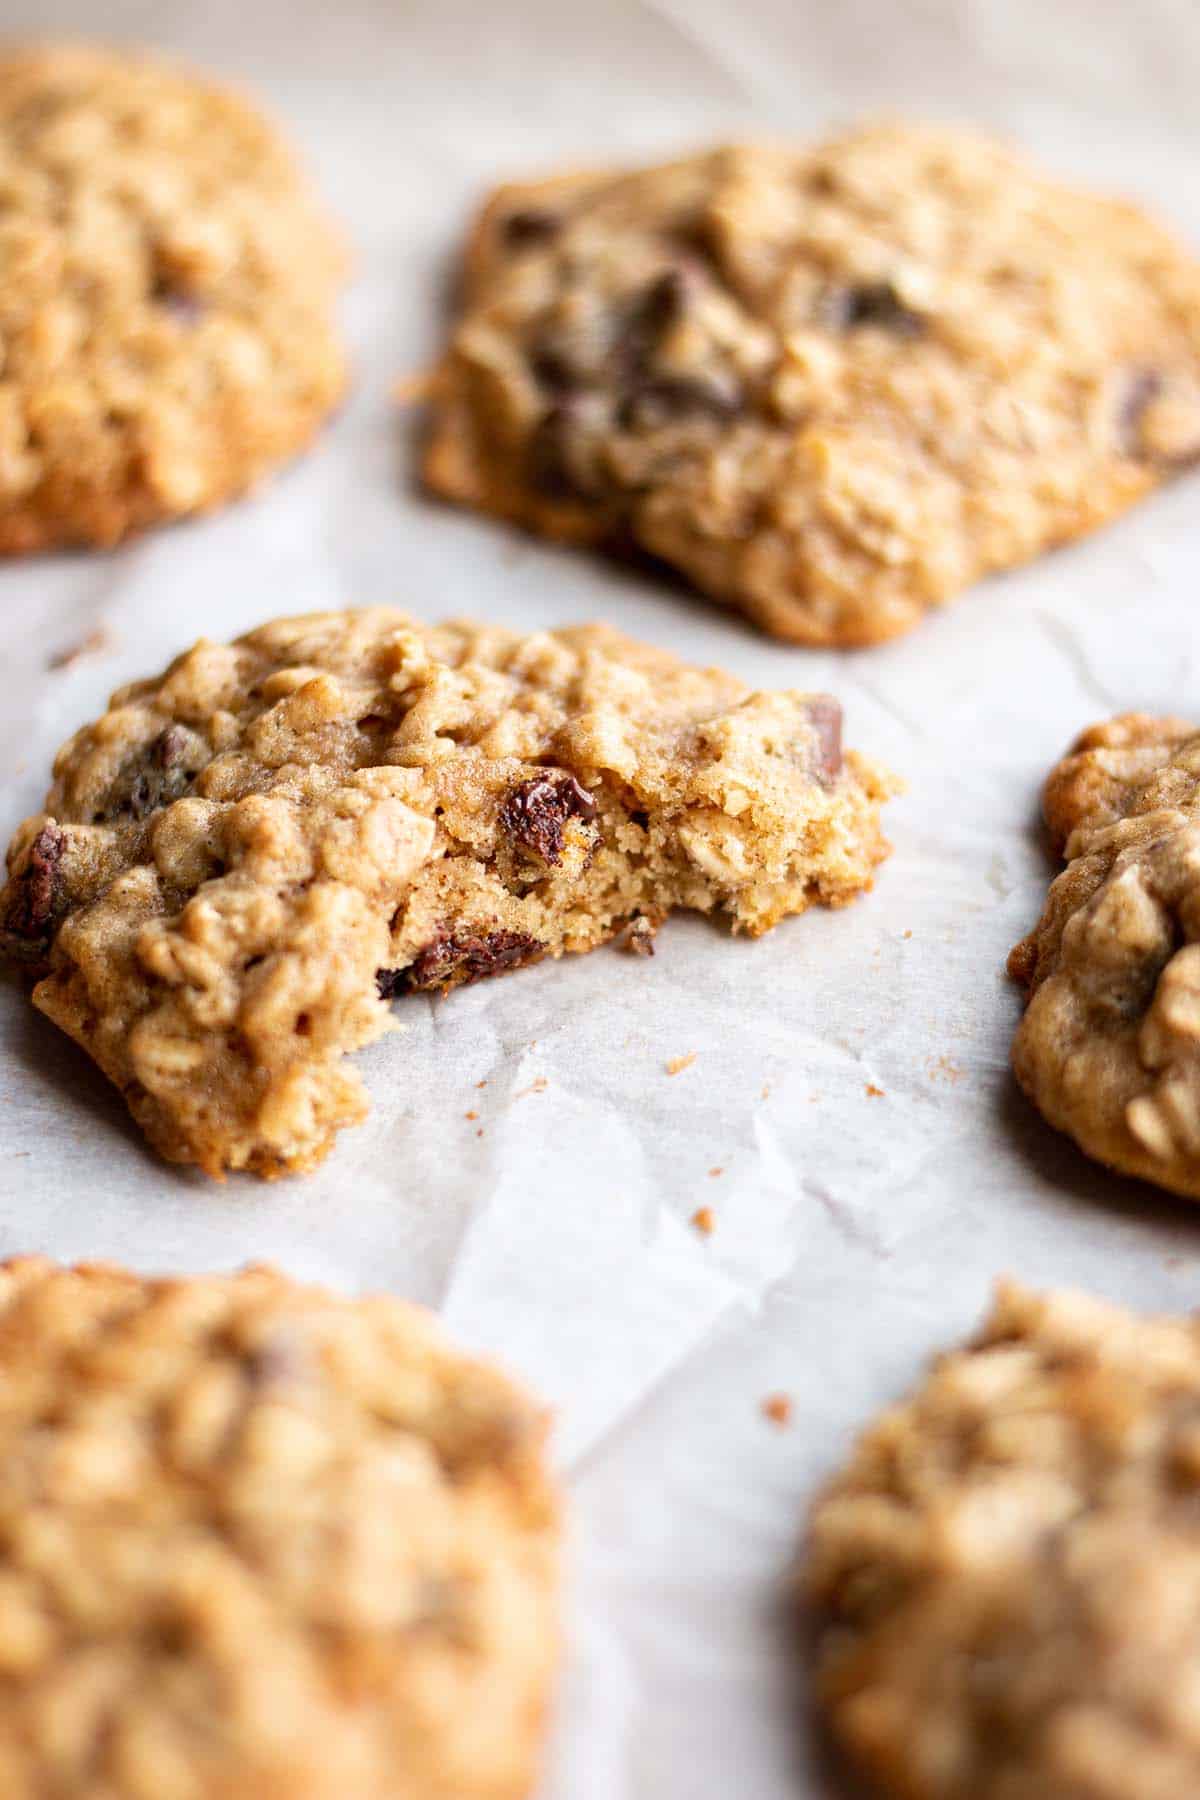 Oatmeal cookies on a baking sheet with one that has a bite taken out.